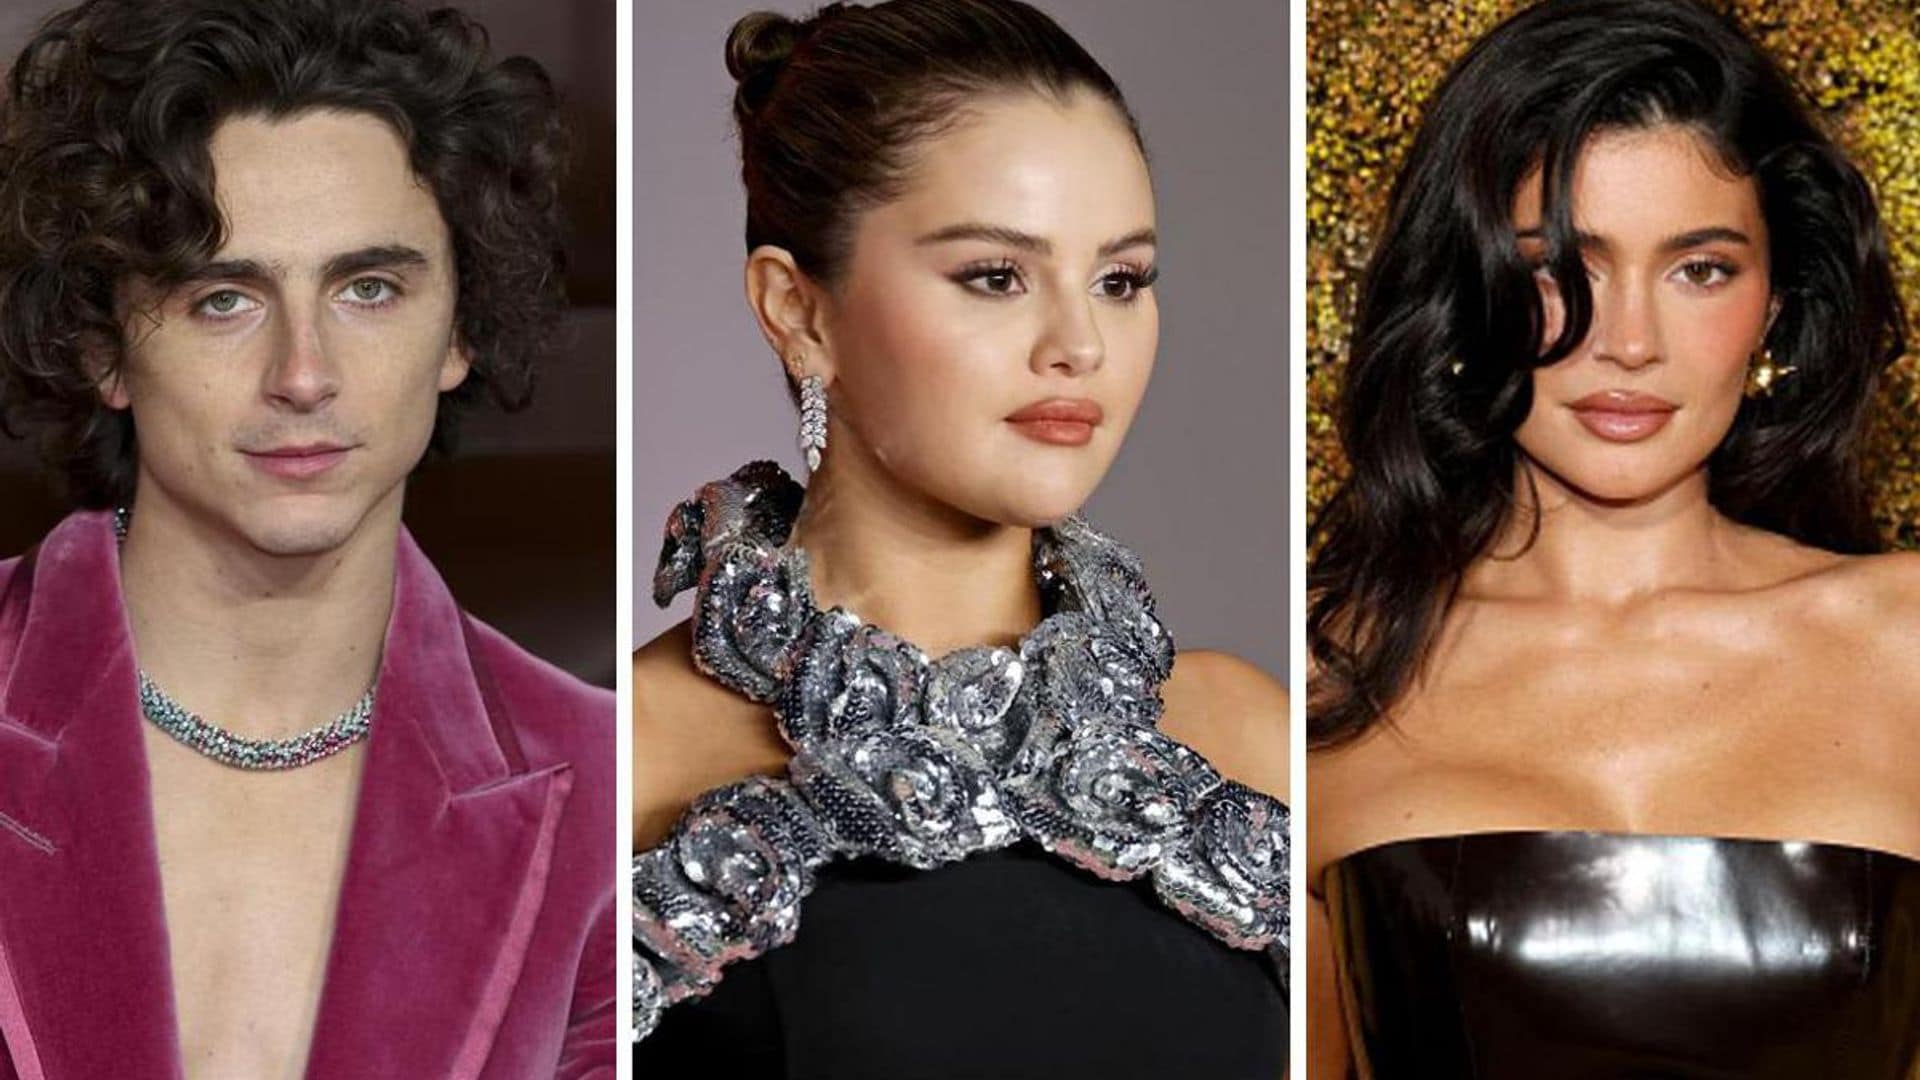 Selena Gomez denies she was gossiping about Timothée Chalamet and Kylie Jenner with Taylor Swift